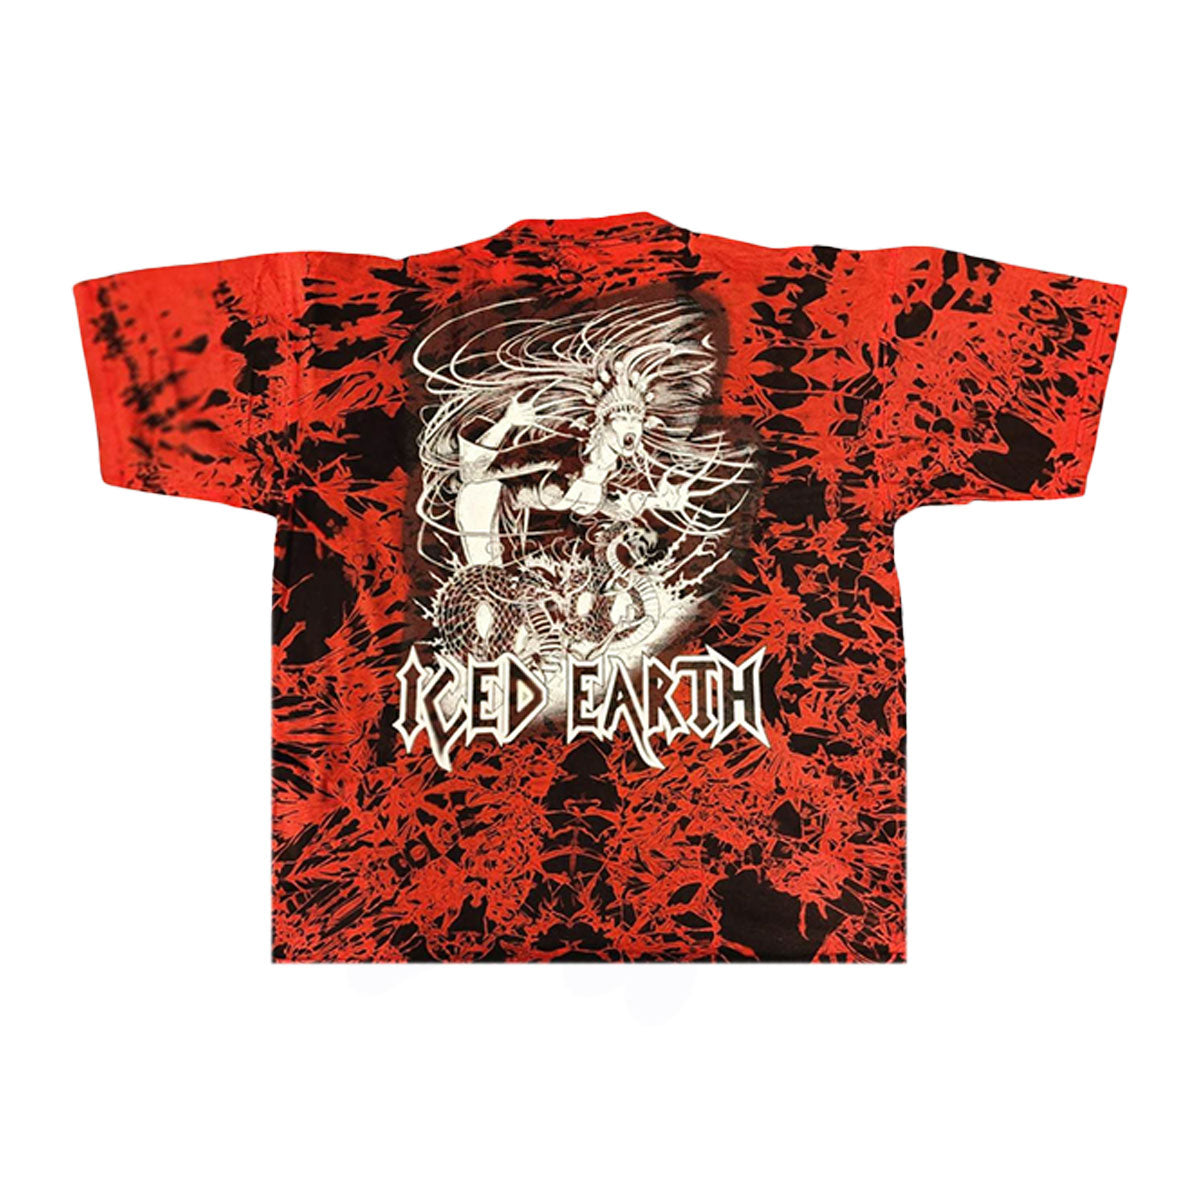 ICED EARTH Days of Purgatory Red Tie-Dye T-Shirt